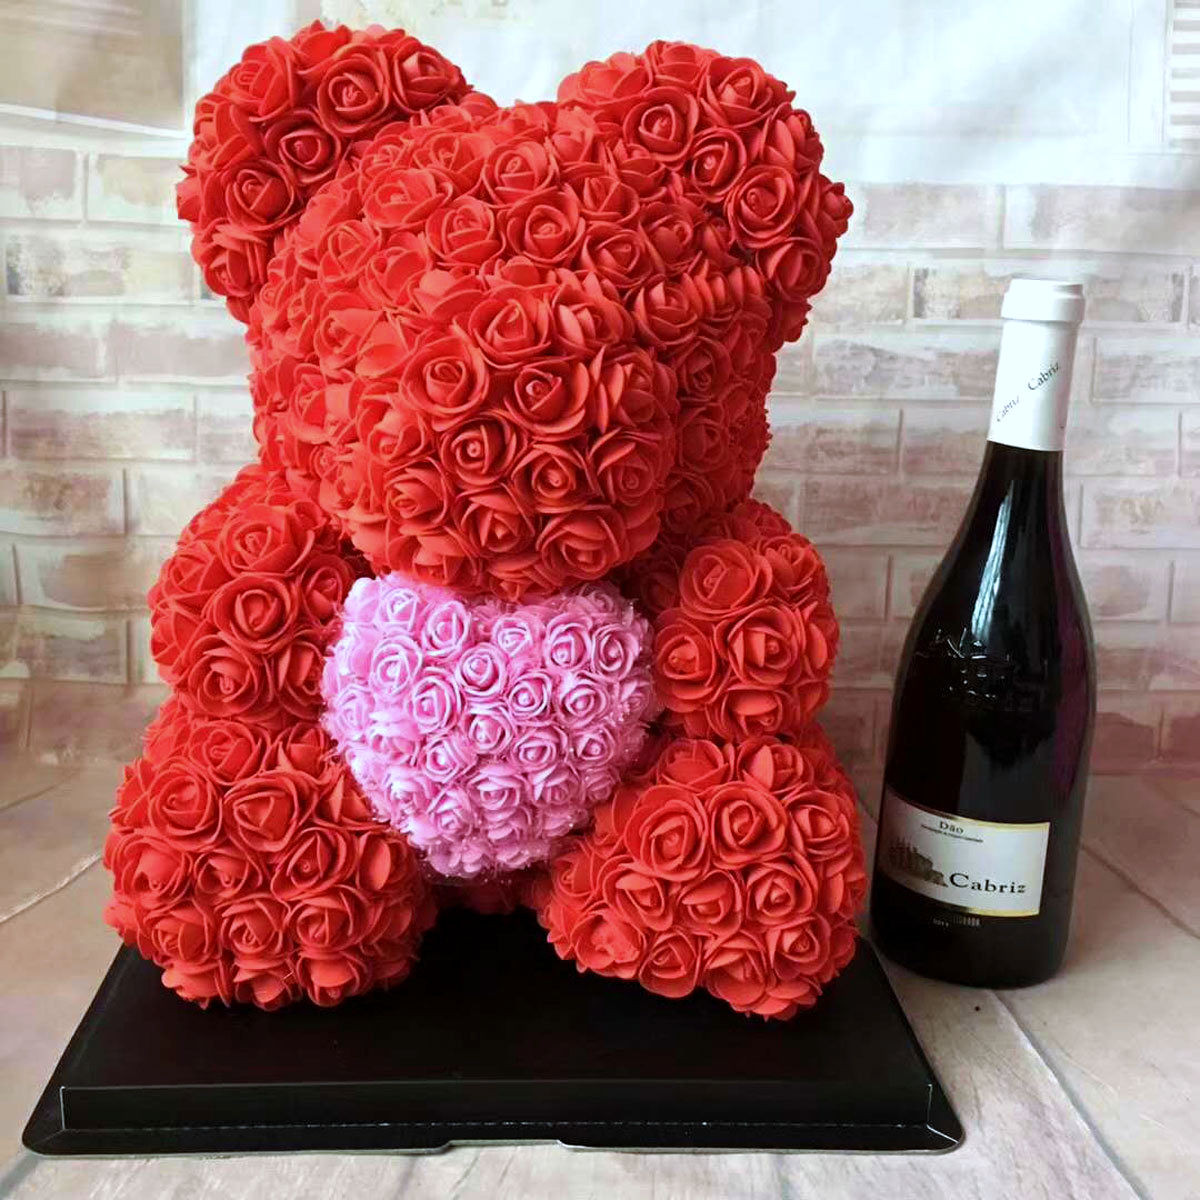 Valentines Gift For Her Ideas
 9 Wine Valentines Day Gift Ideas for Her